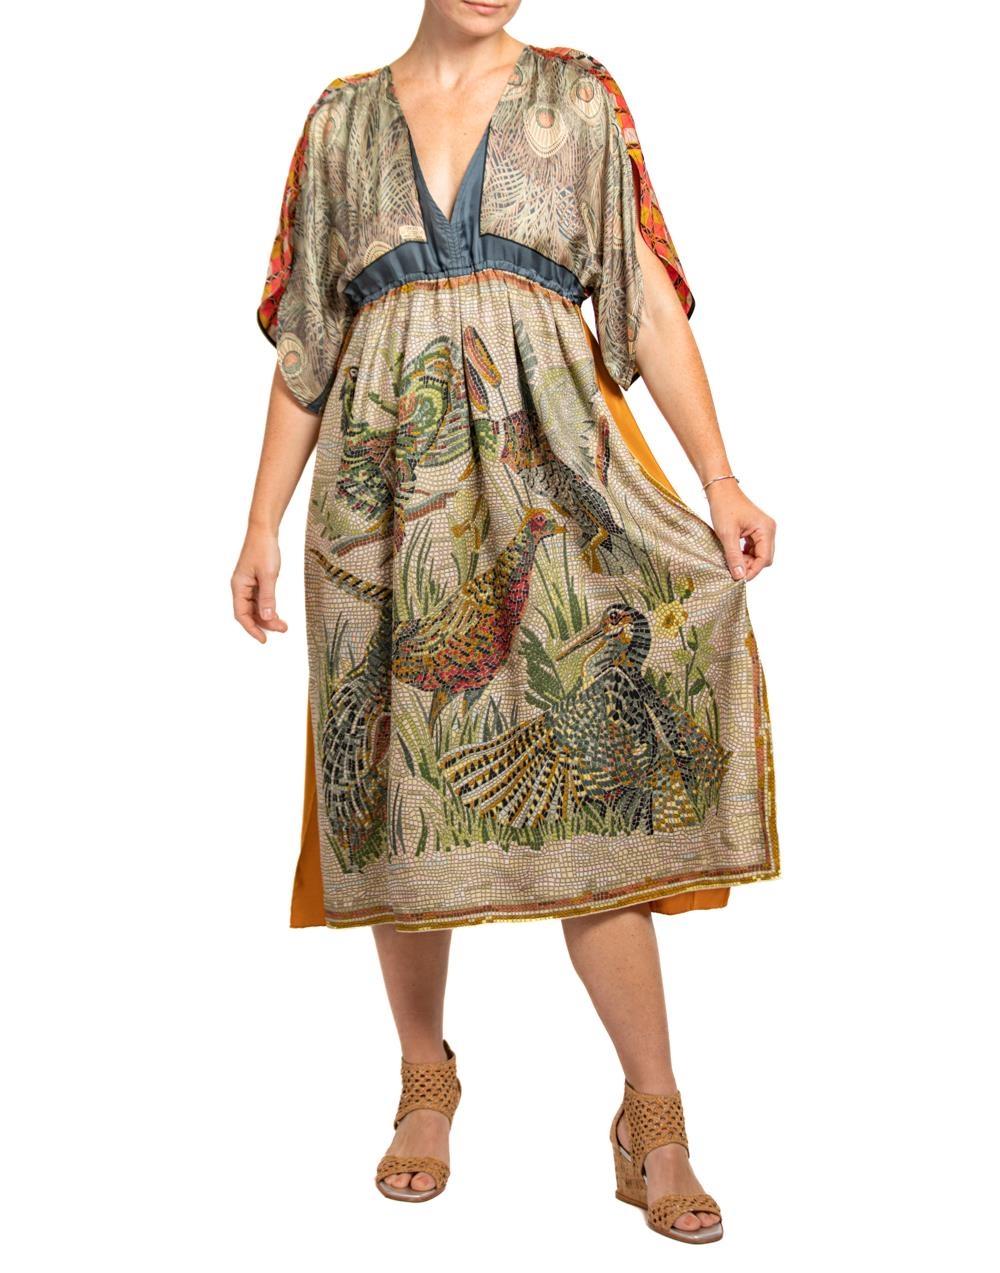 Women's MORPHEW COLLECTION Brown & Gray Silk Virgo Empire Waist Dress Made From Vintage For Sale